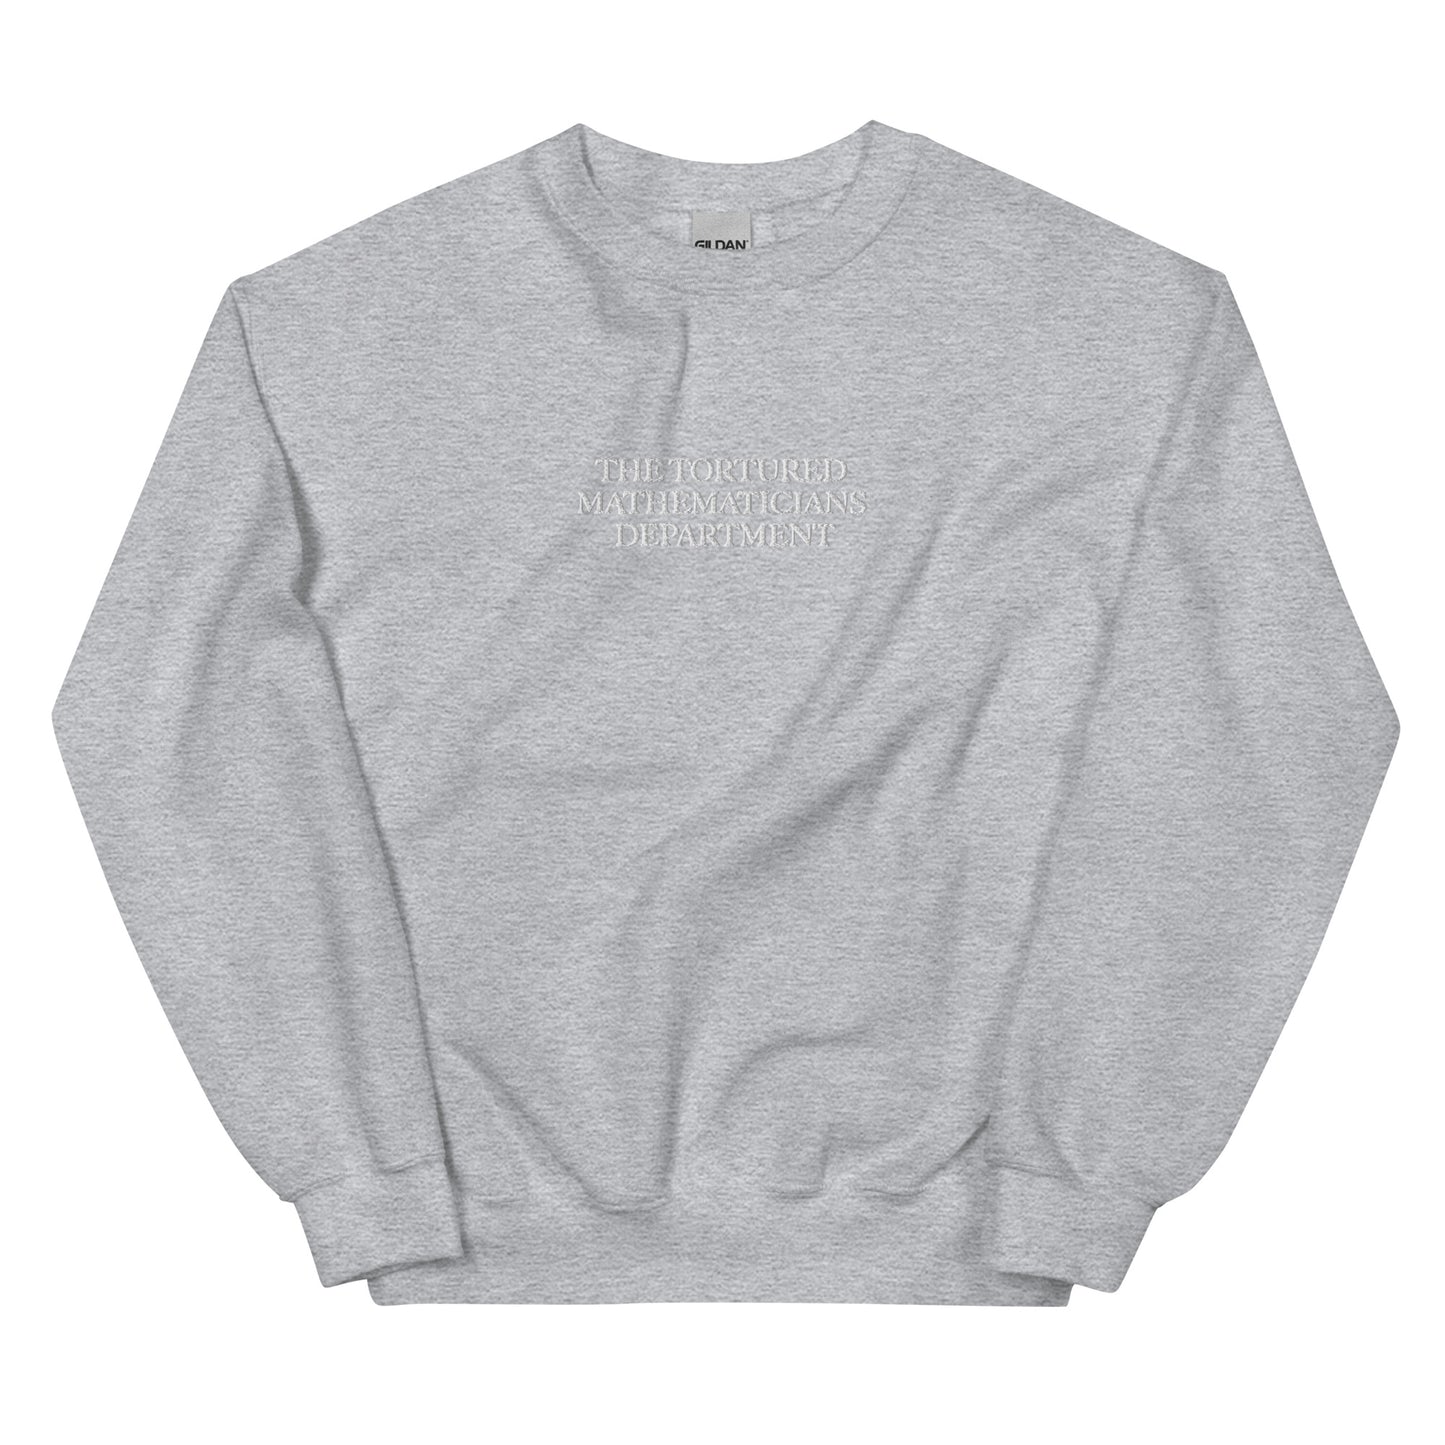 The Tortured Mathematicians Department Embroidered Sweatshirt